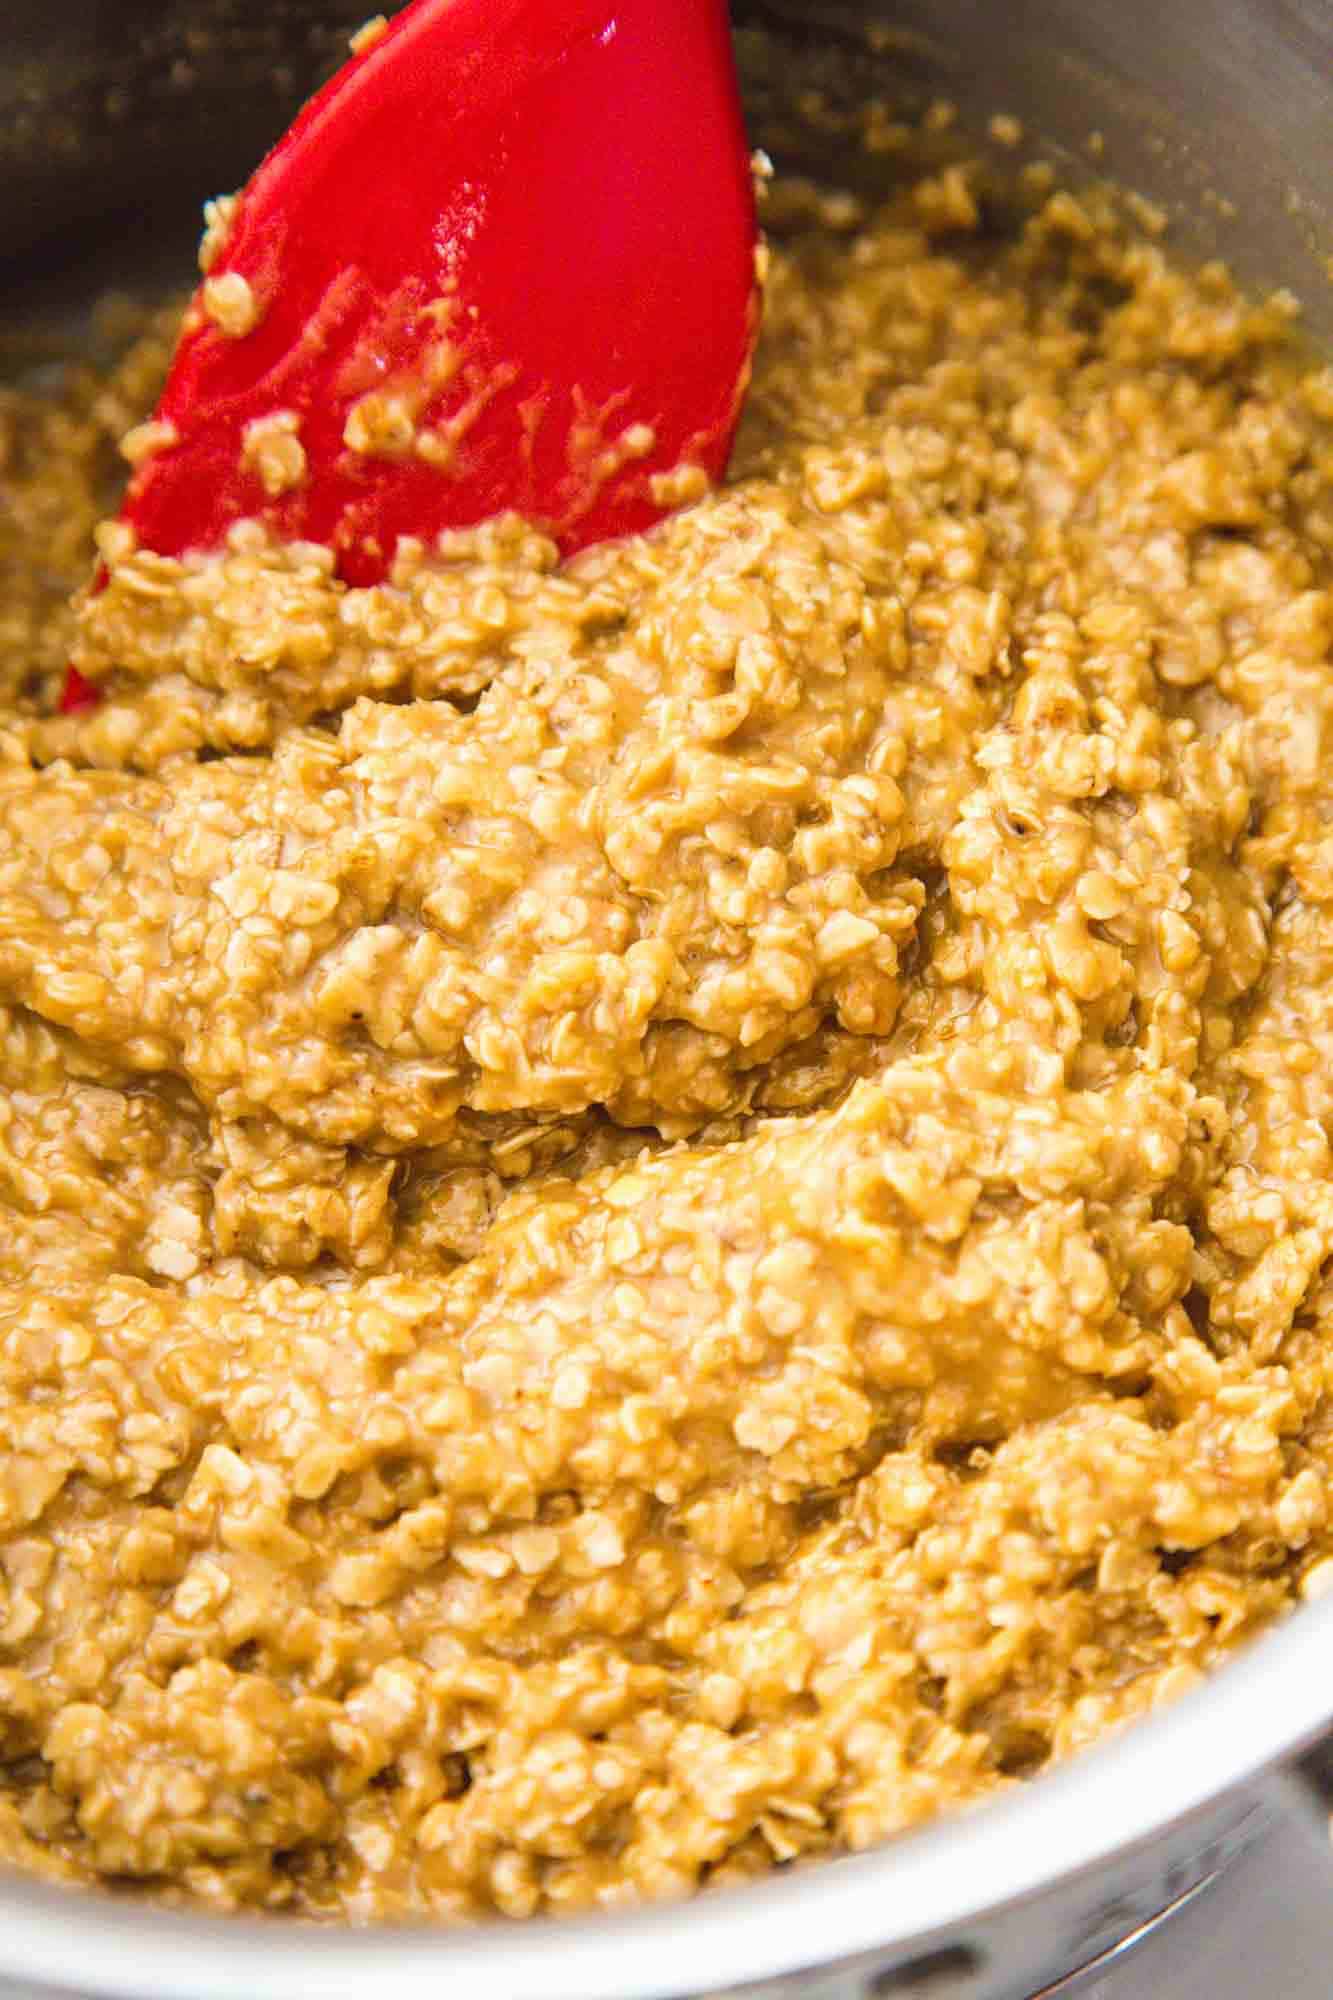 No bake peanut butter cookies mixture in a saucepan with a red spatula